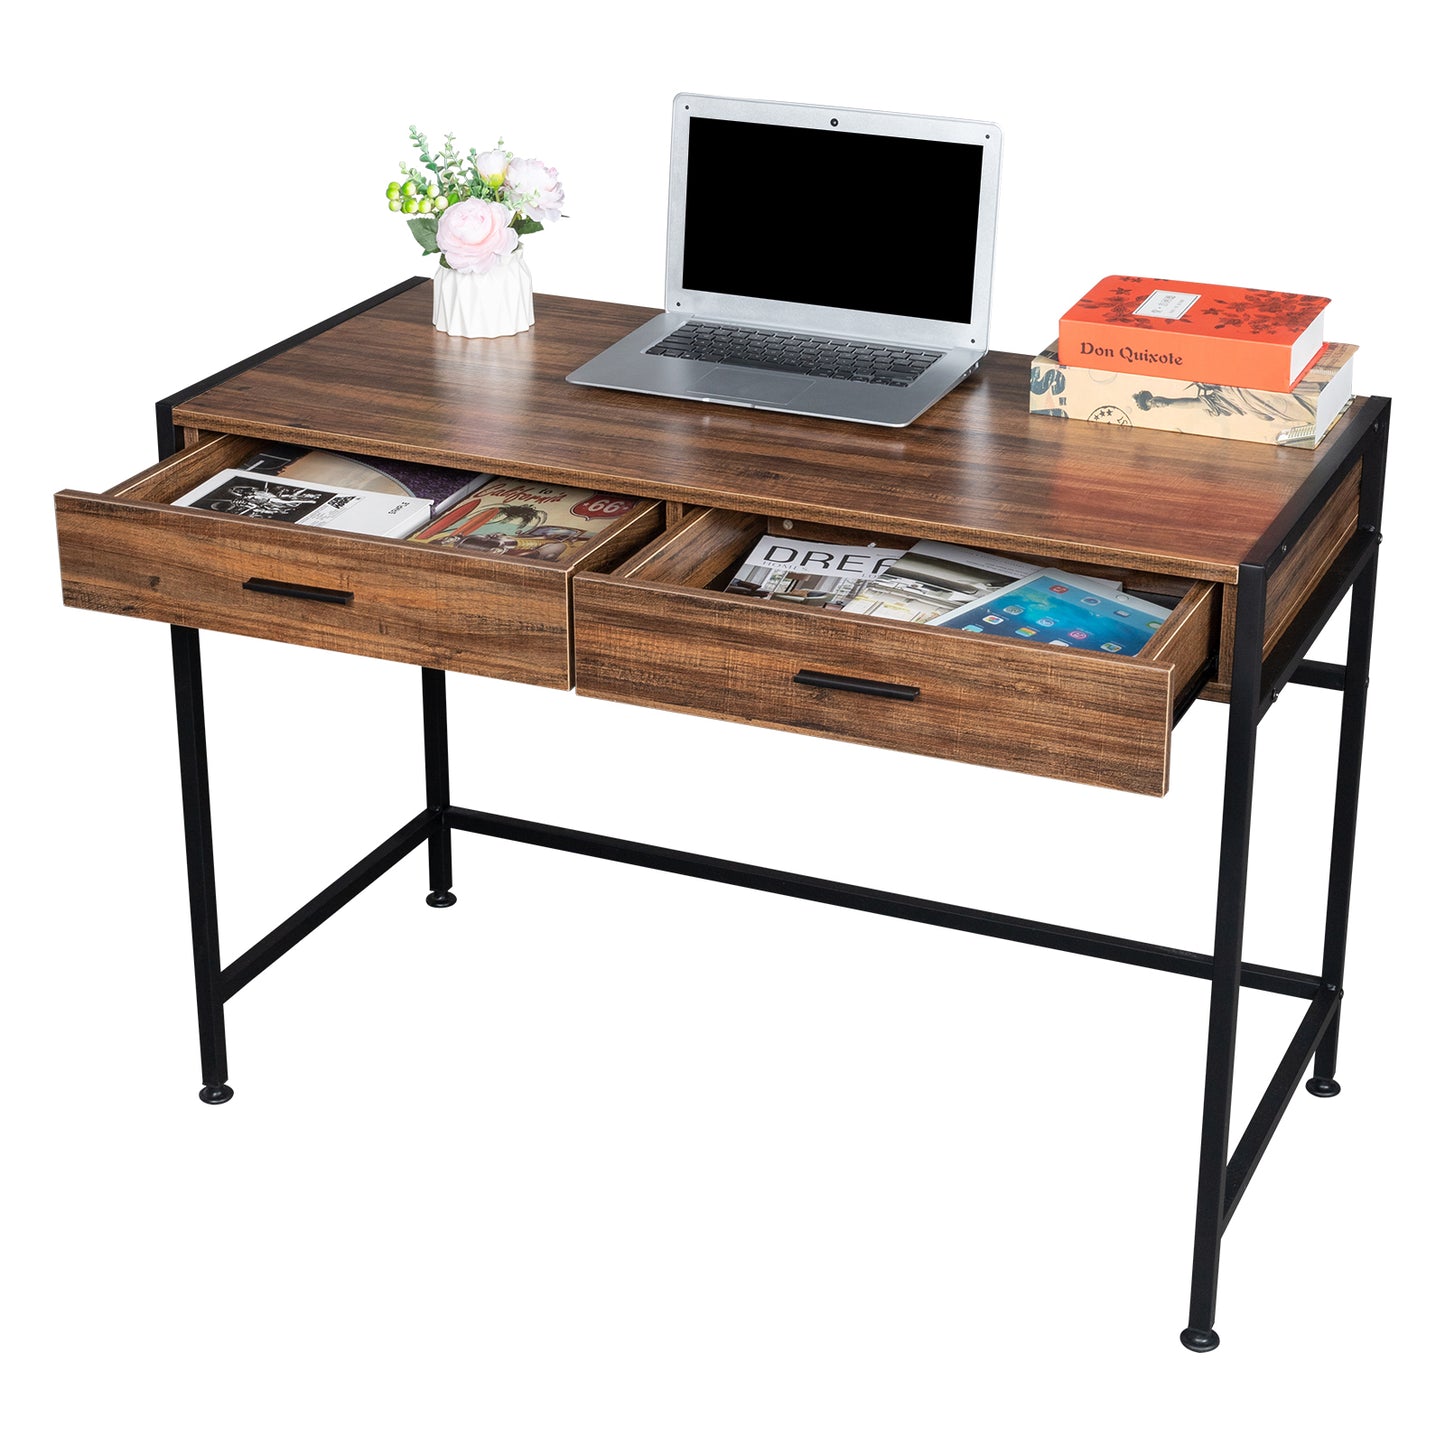 106*50*75cm Retro Wood Table Top Black Steel Frame Particle Board Two Drawers Computer Desk Can Be Used For Study Desk MLNshops